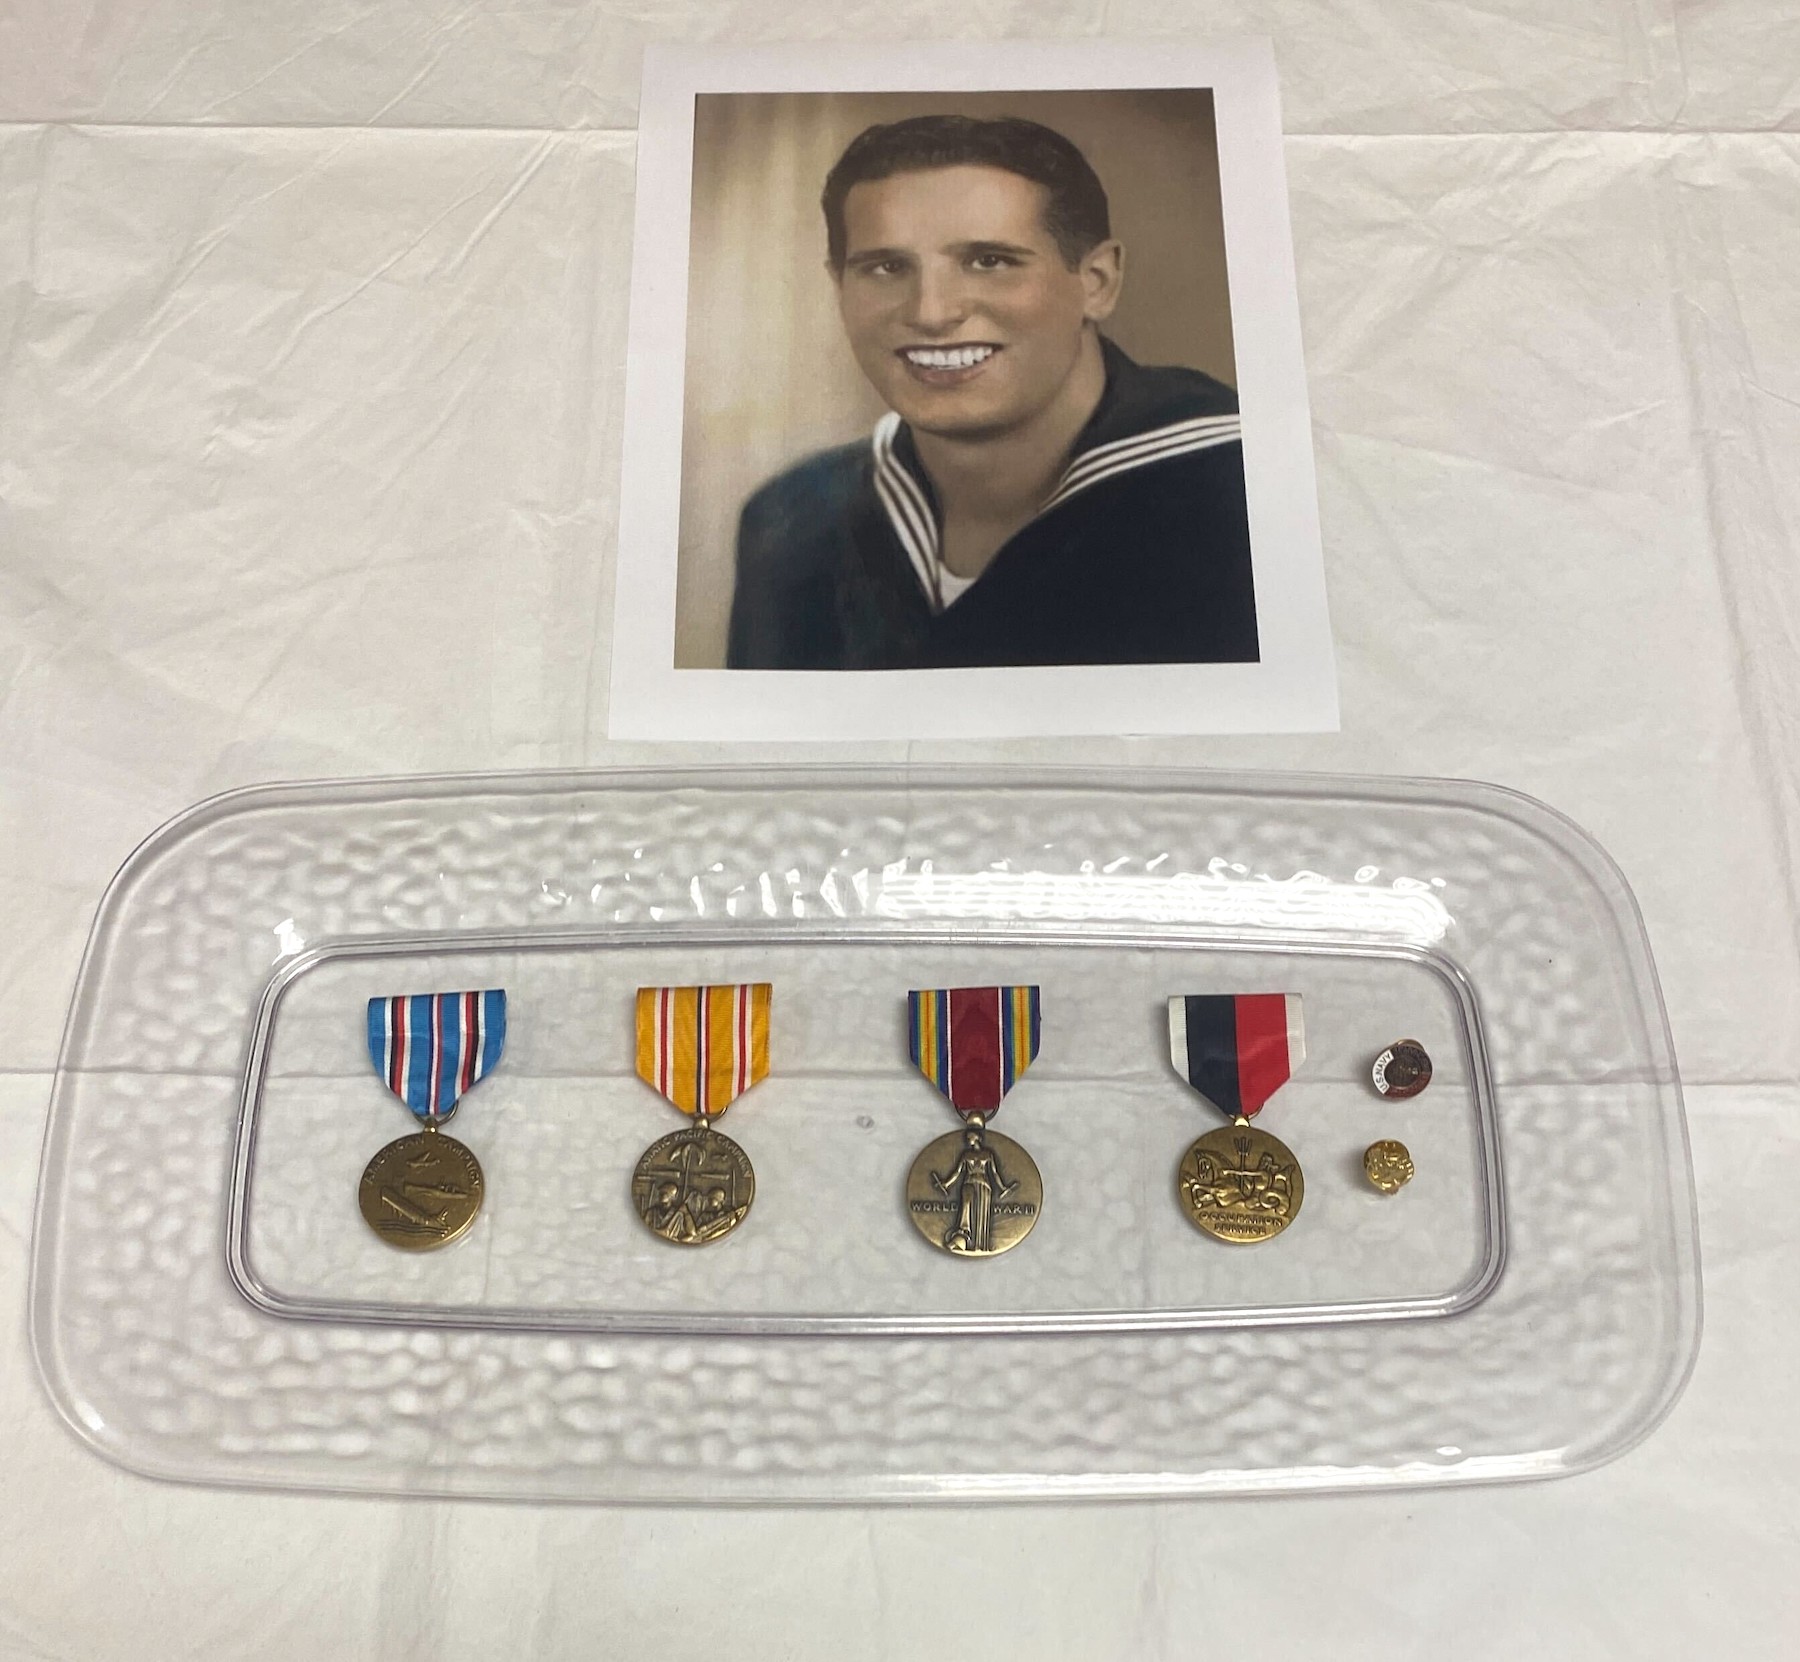 Shown is a collection of medals earned by U.S. Navy Fireman First Class Bob Ramos. (Photos courtesy of the Office of Congressman Brian Higgins)